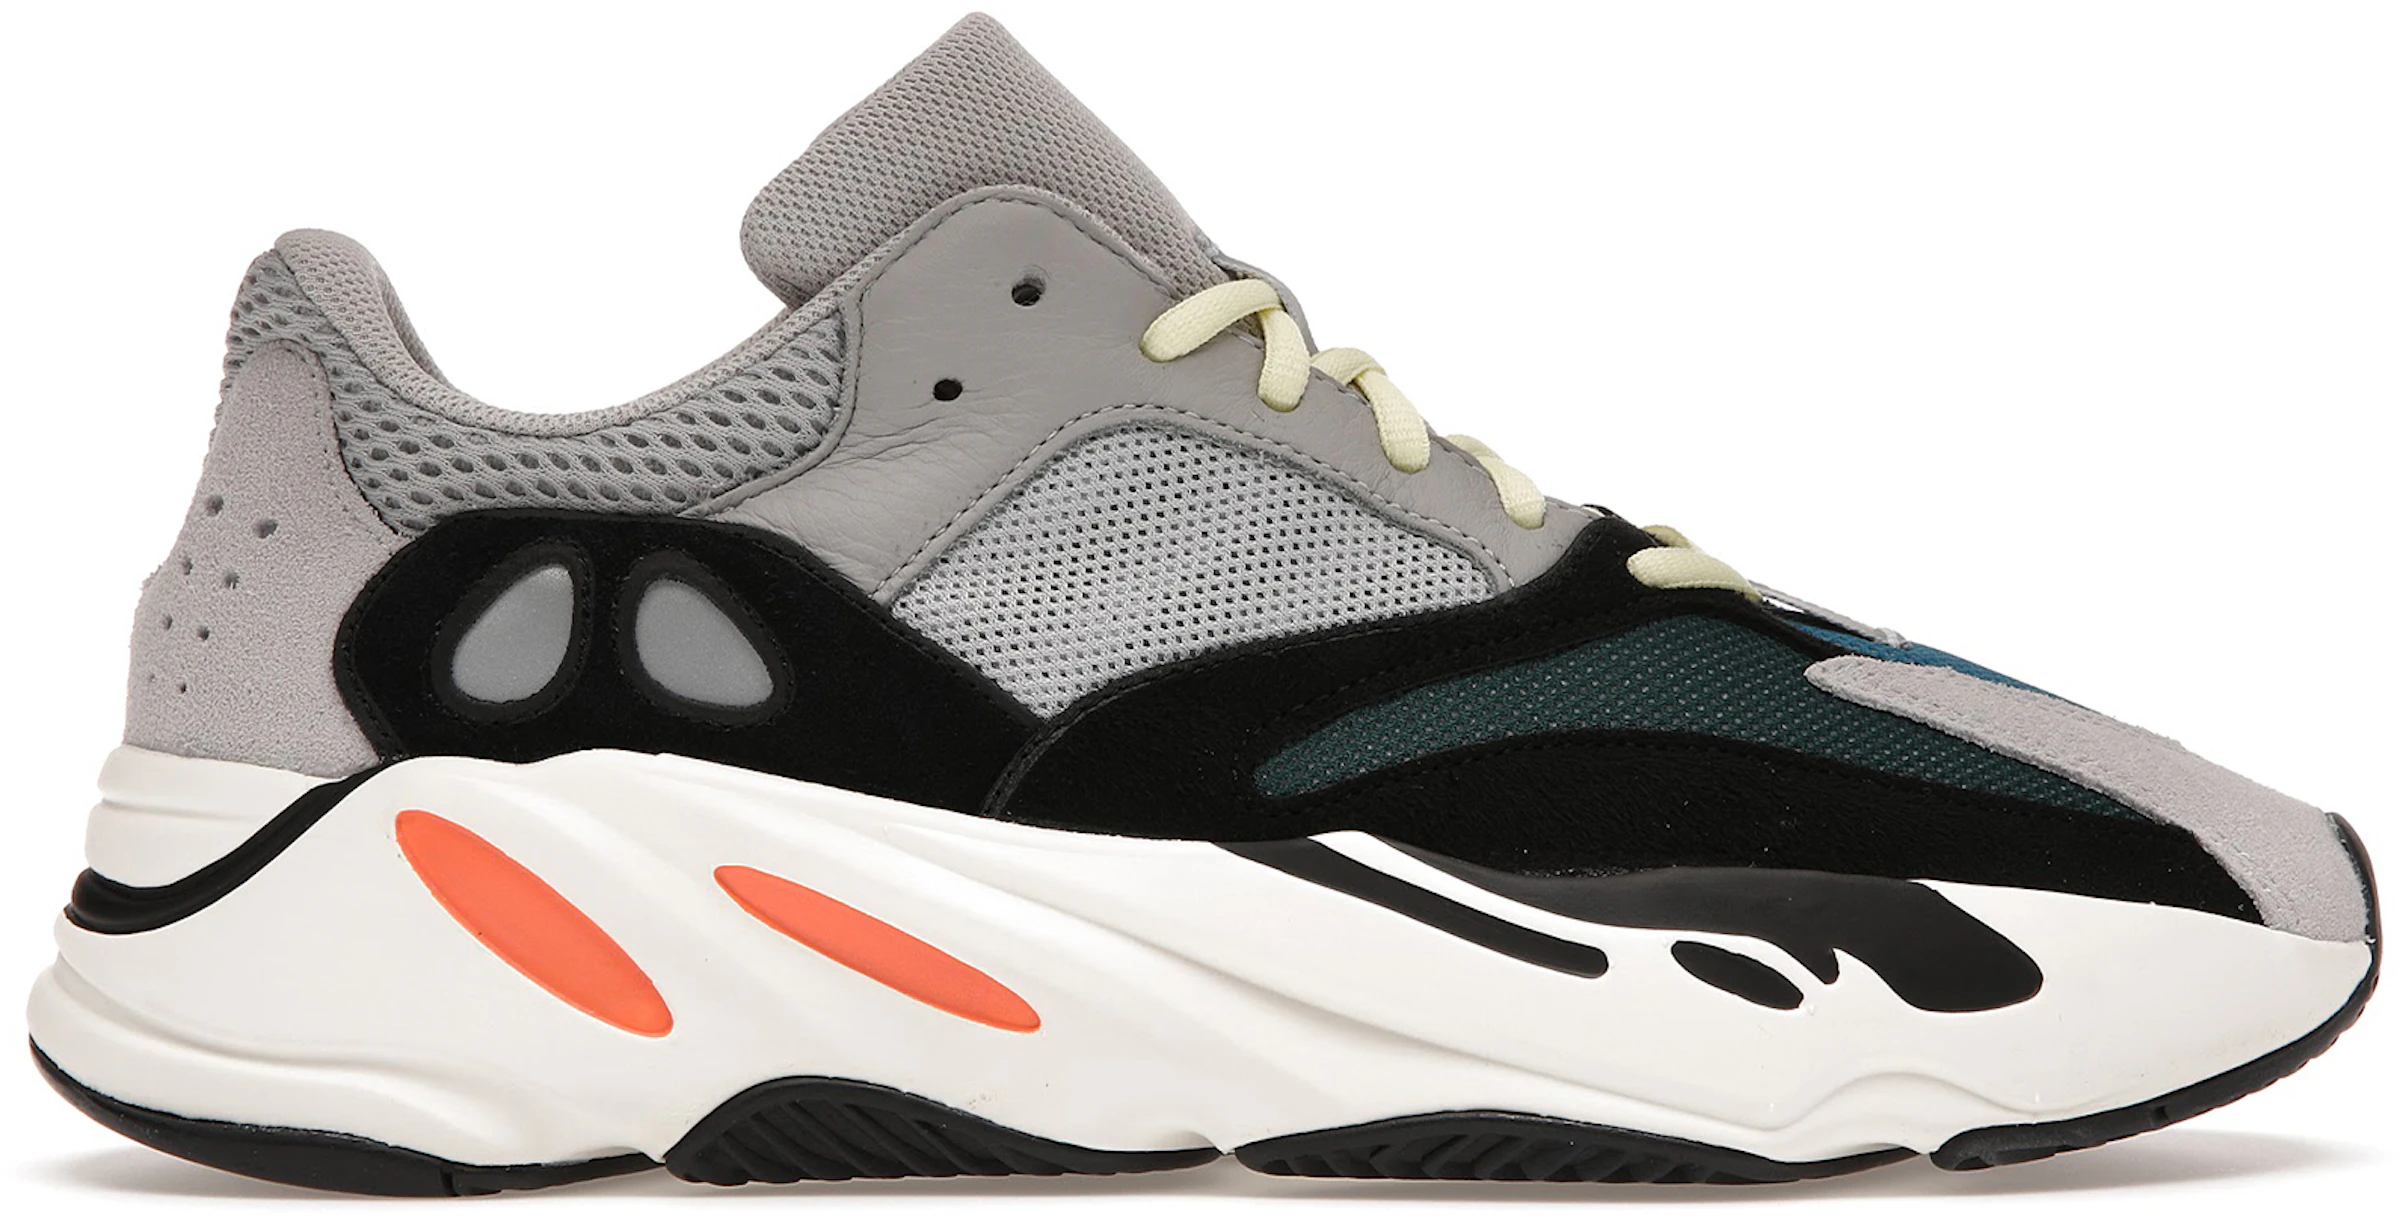 Adidas Yeezy Boost 700 Sneakers Flight Club | vlr.eng.br